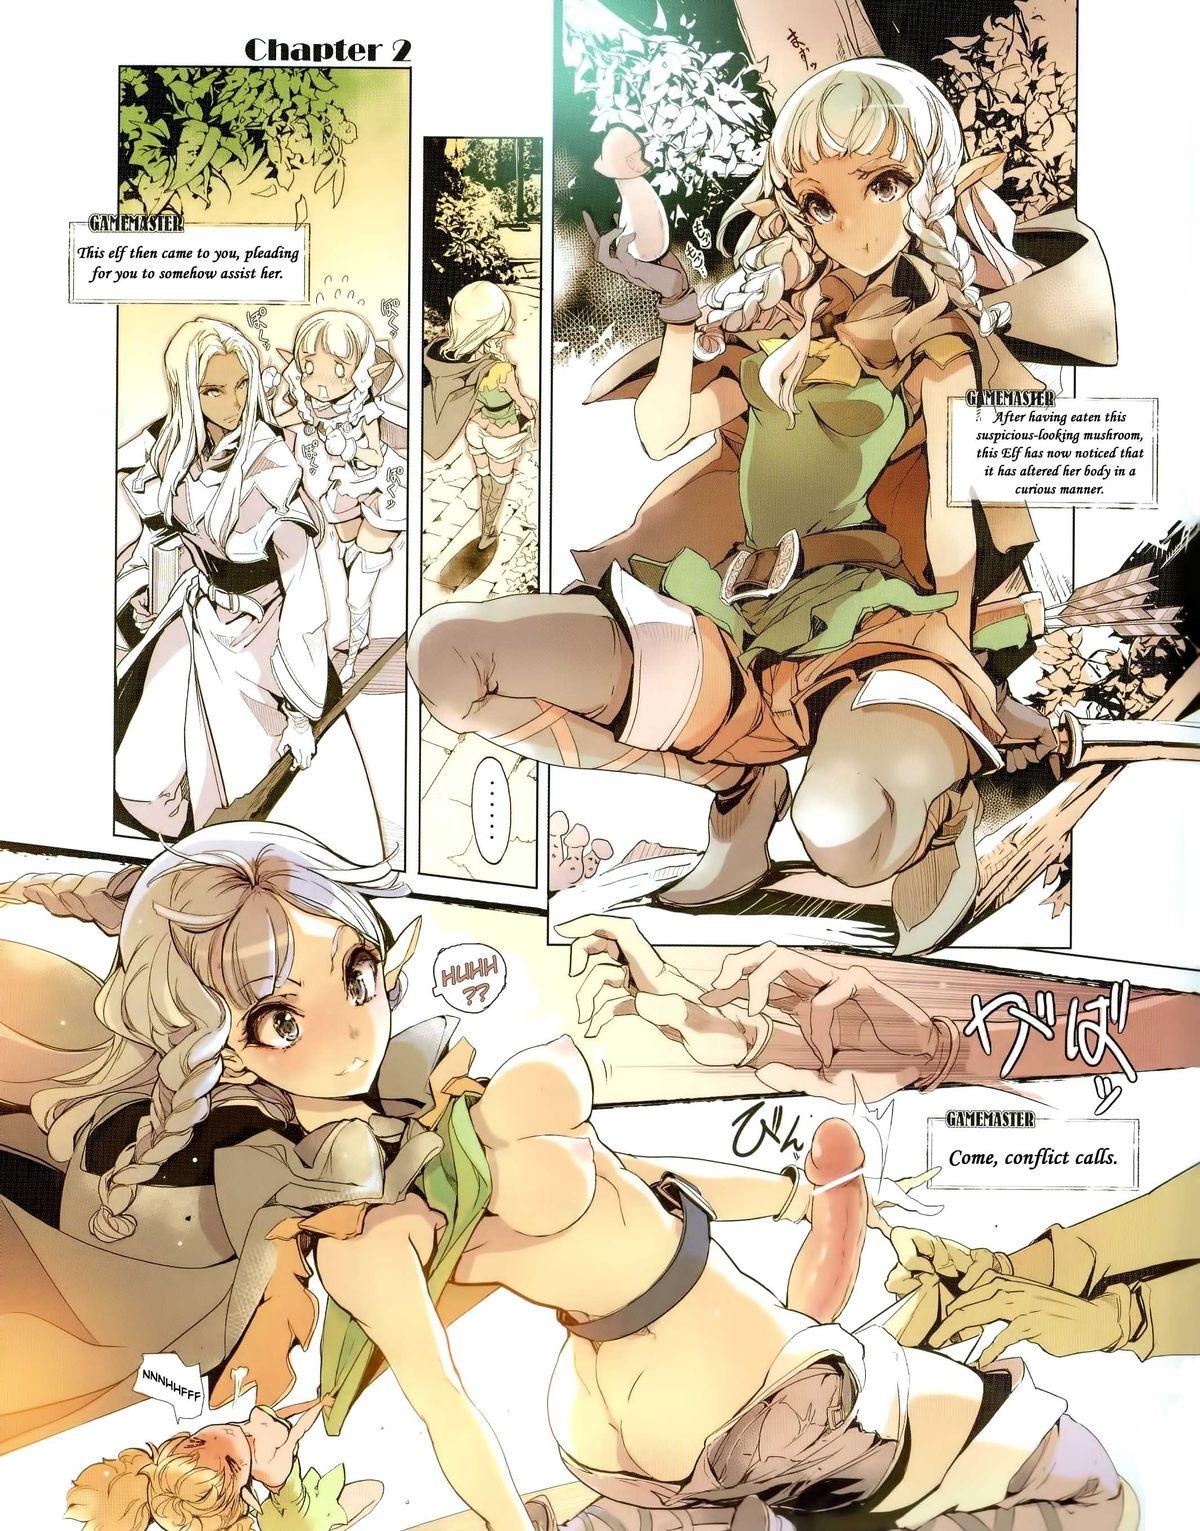 Old Vs Young D&! -DRAGON & ! - Dragons crown Ftvgirls - Page 5